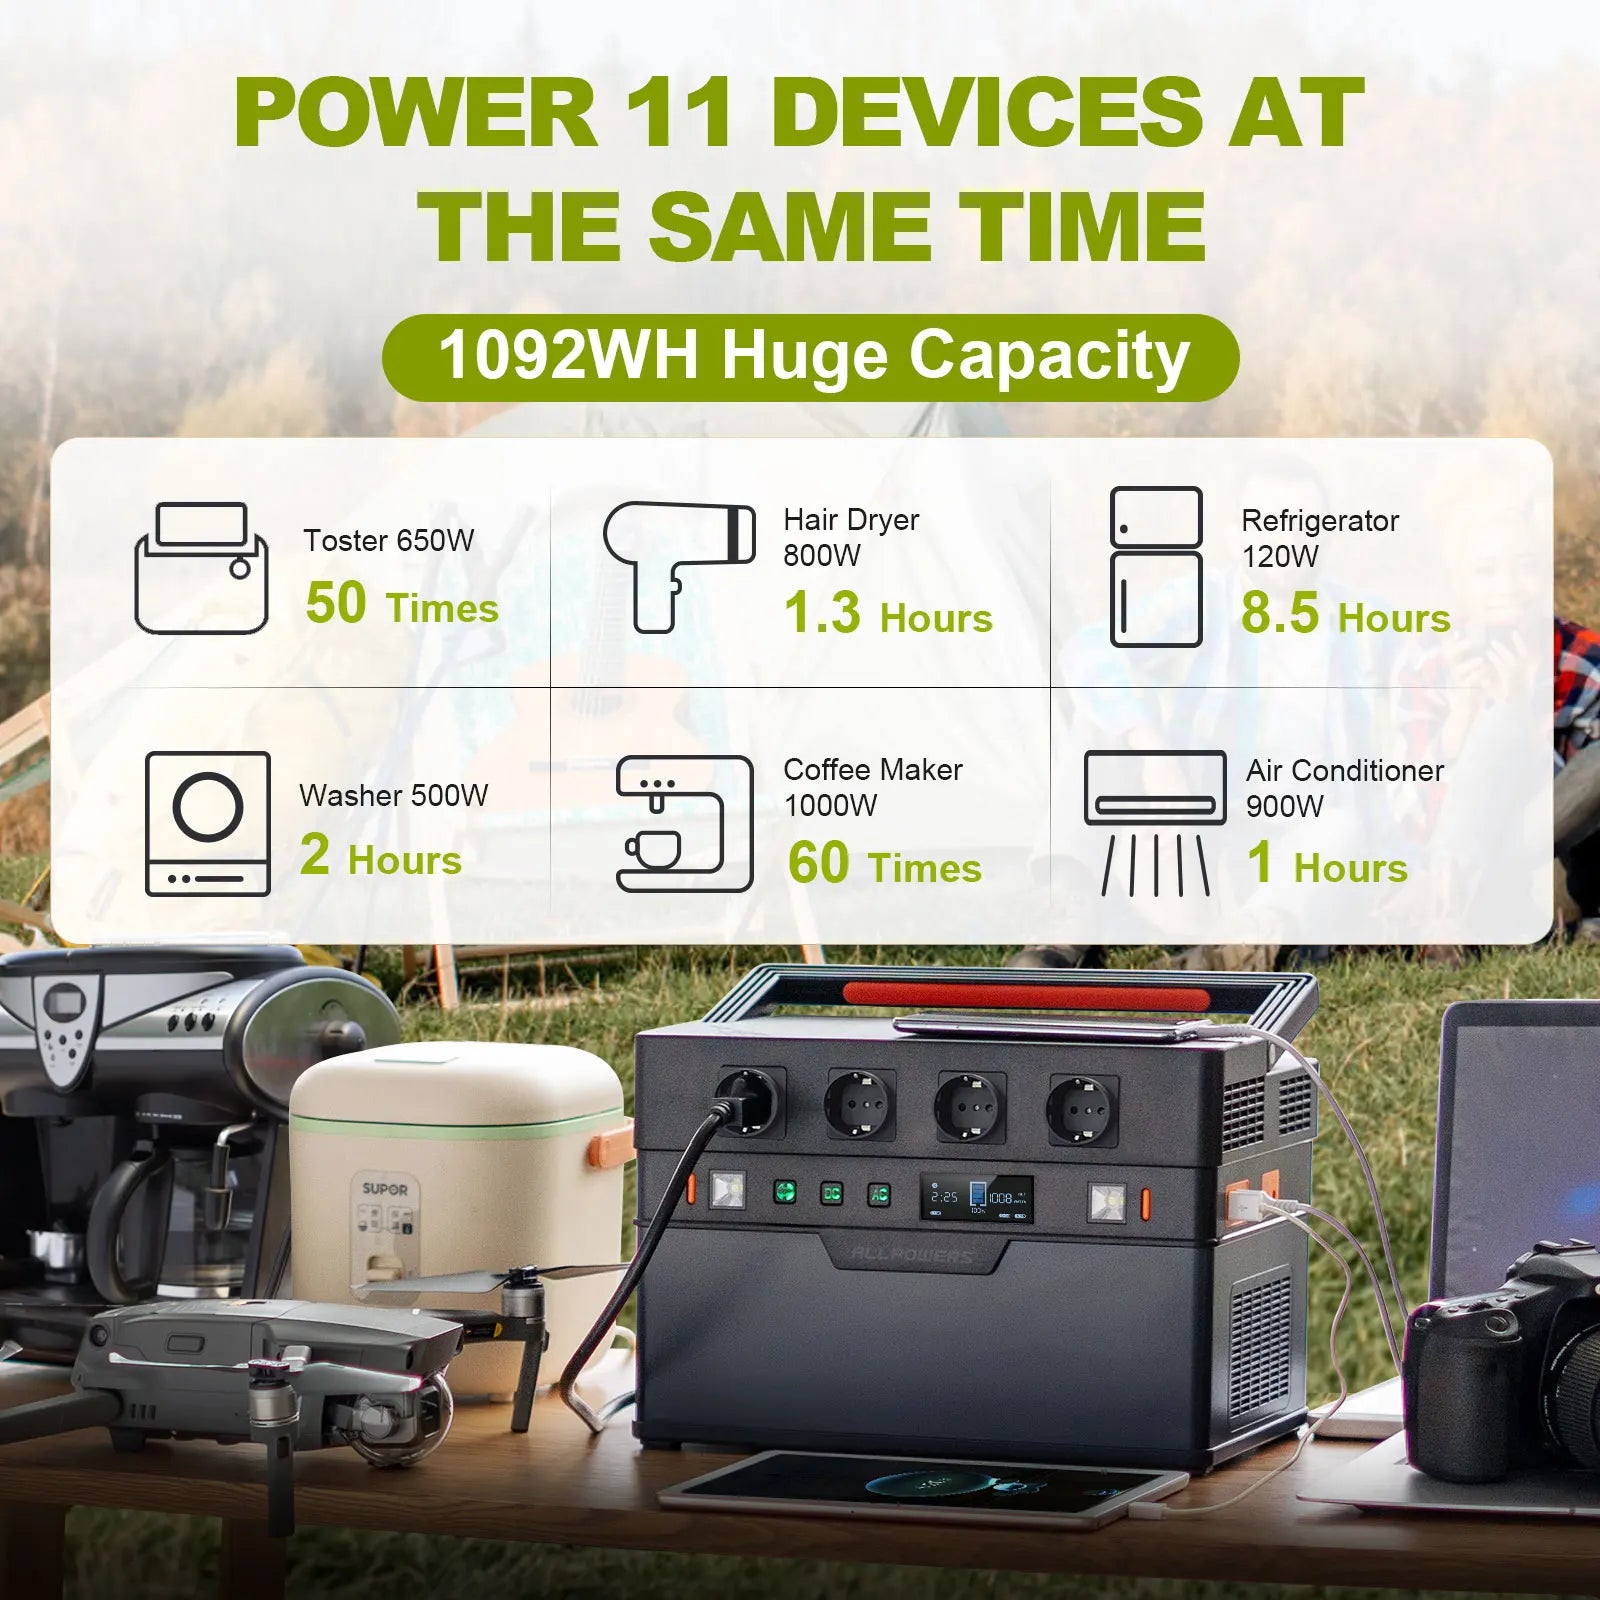 Power up to 11 devices simultaneously with this high-capacity power station.